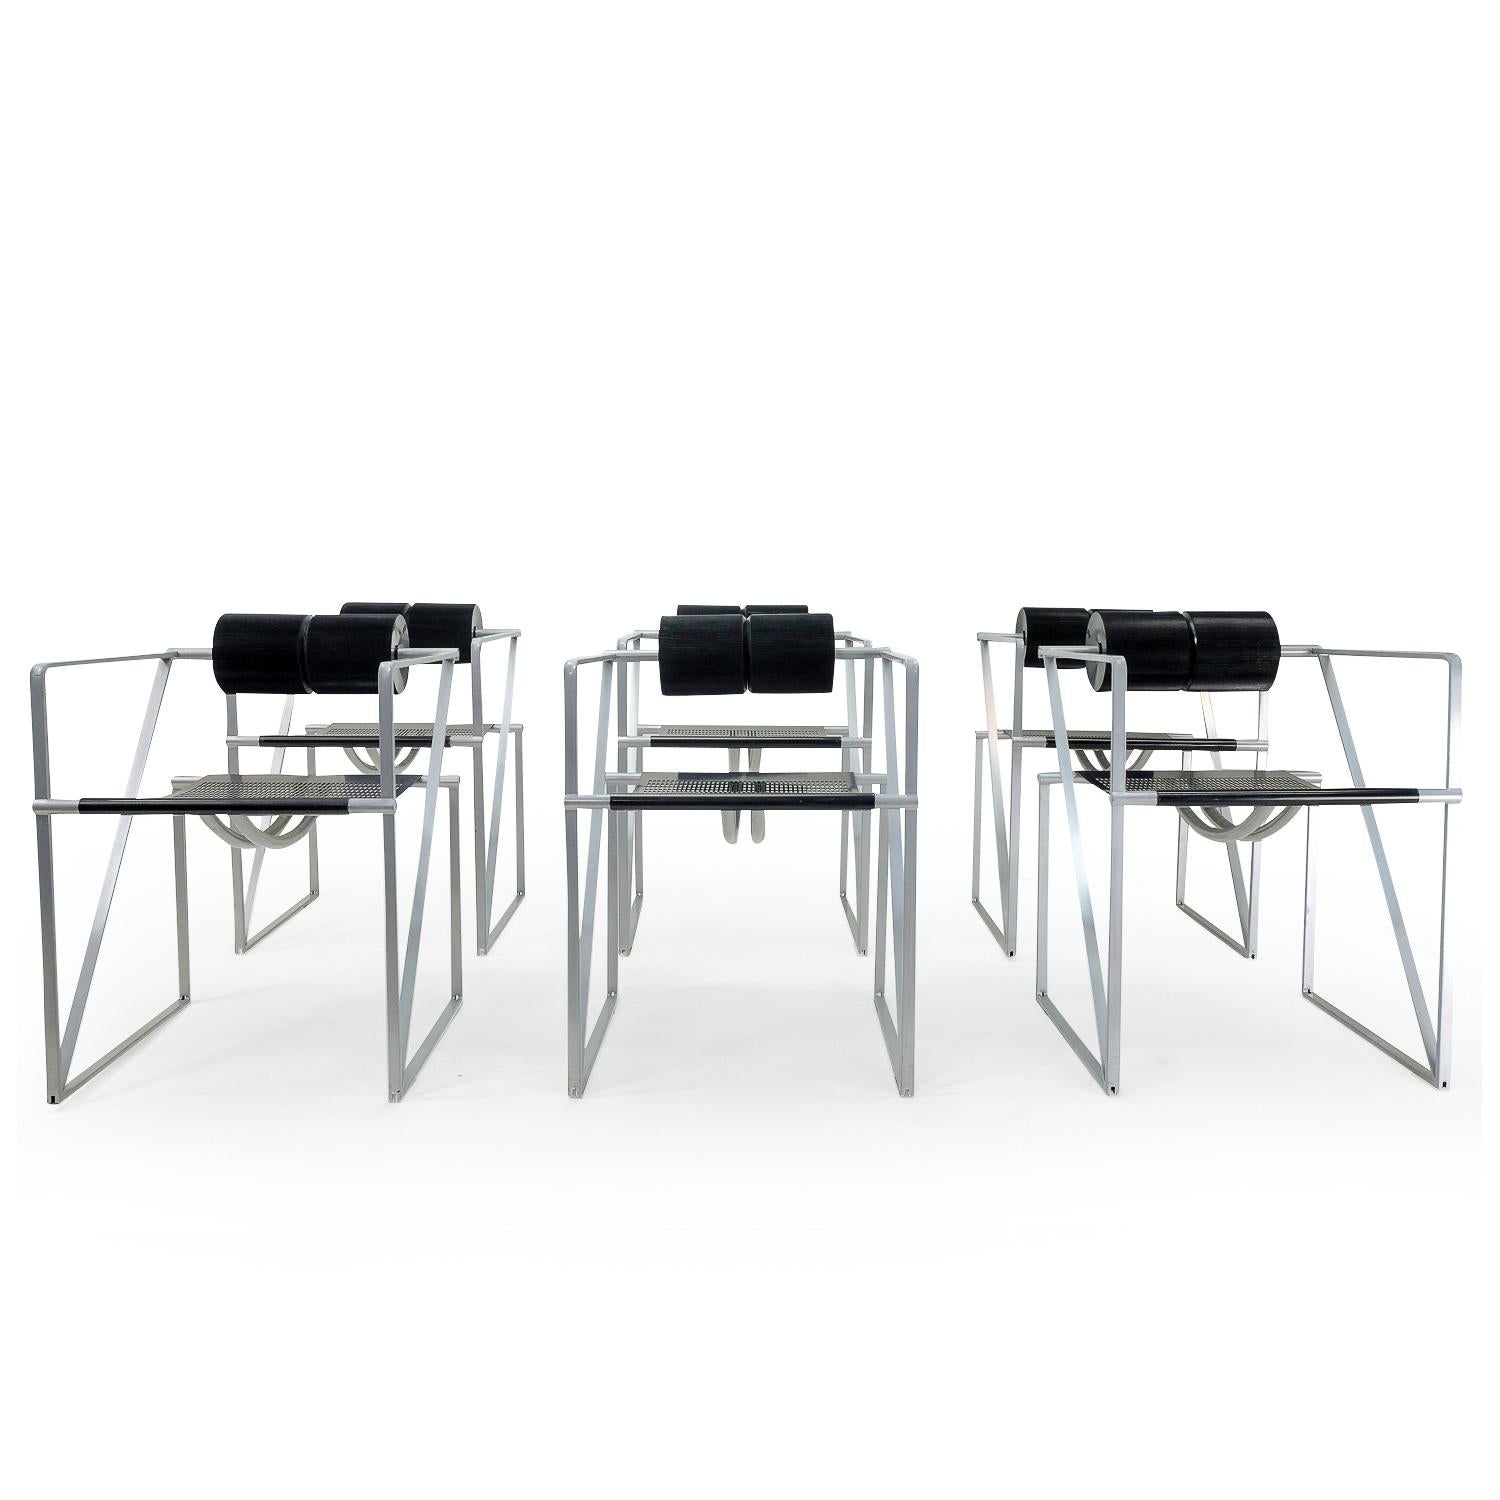 Late 20th Century Set of 6, Seconda Chairs by Swiss Architect Mario Botta for Alias, 1980s For Sale